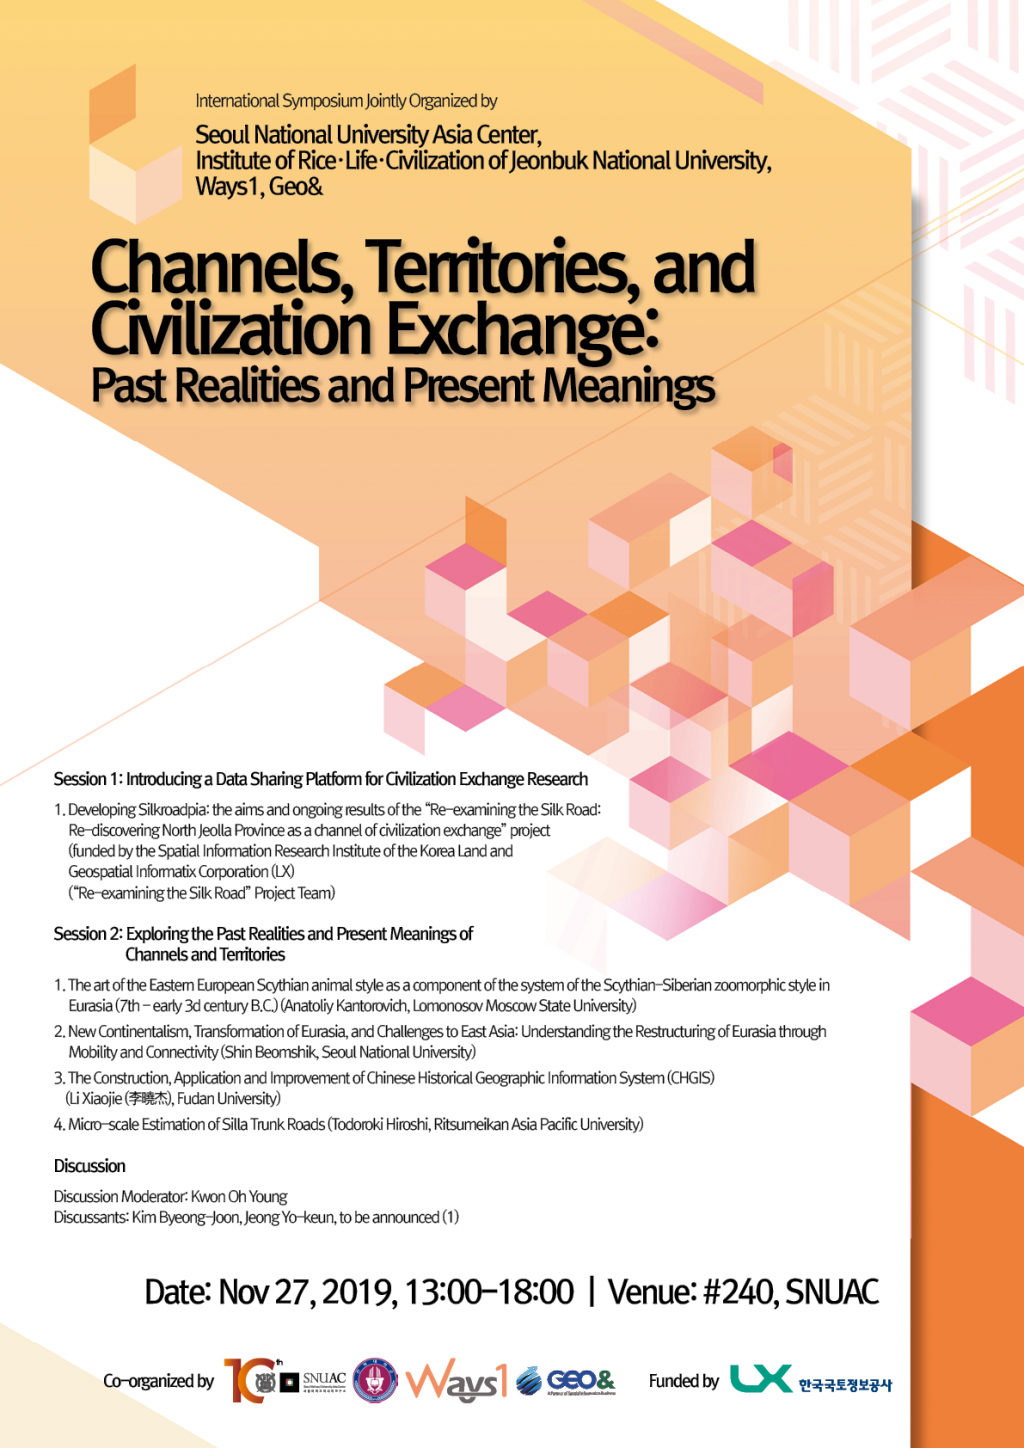 Channels, Territories, and Civilization Exchange: Past Realities and Present Meanings